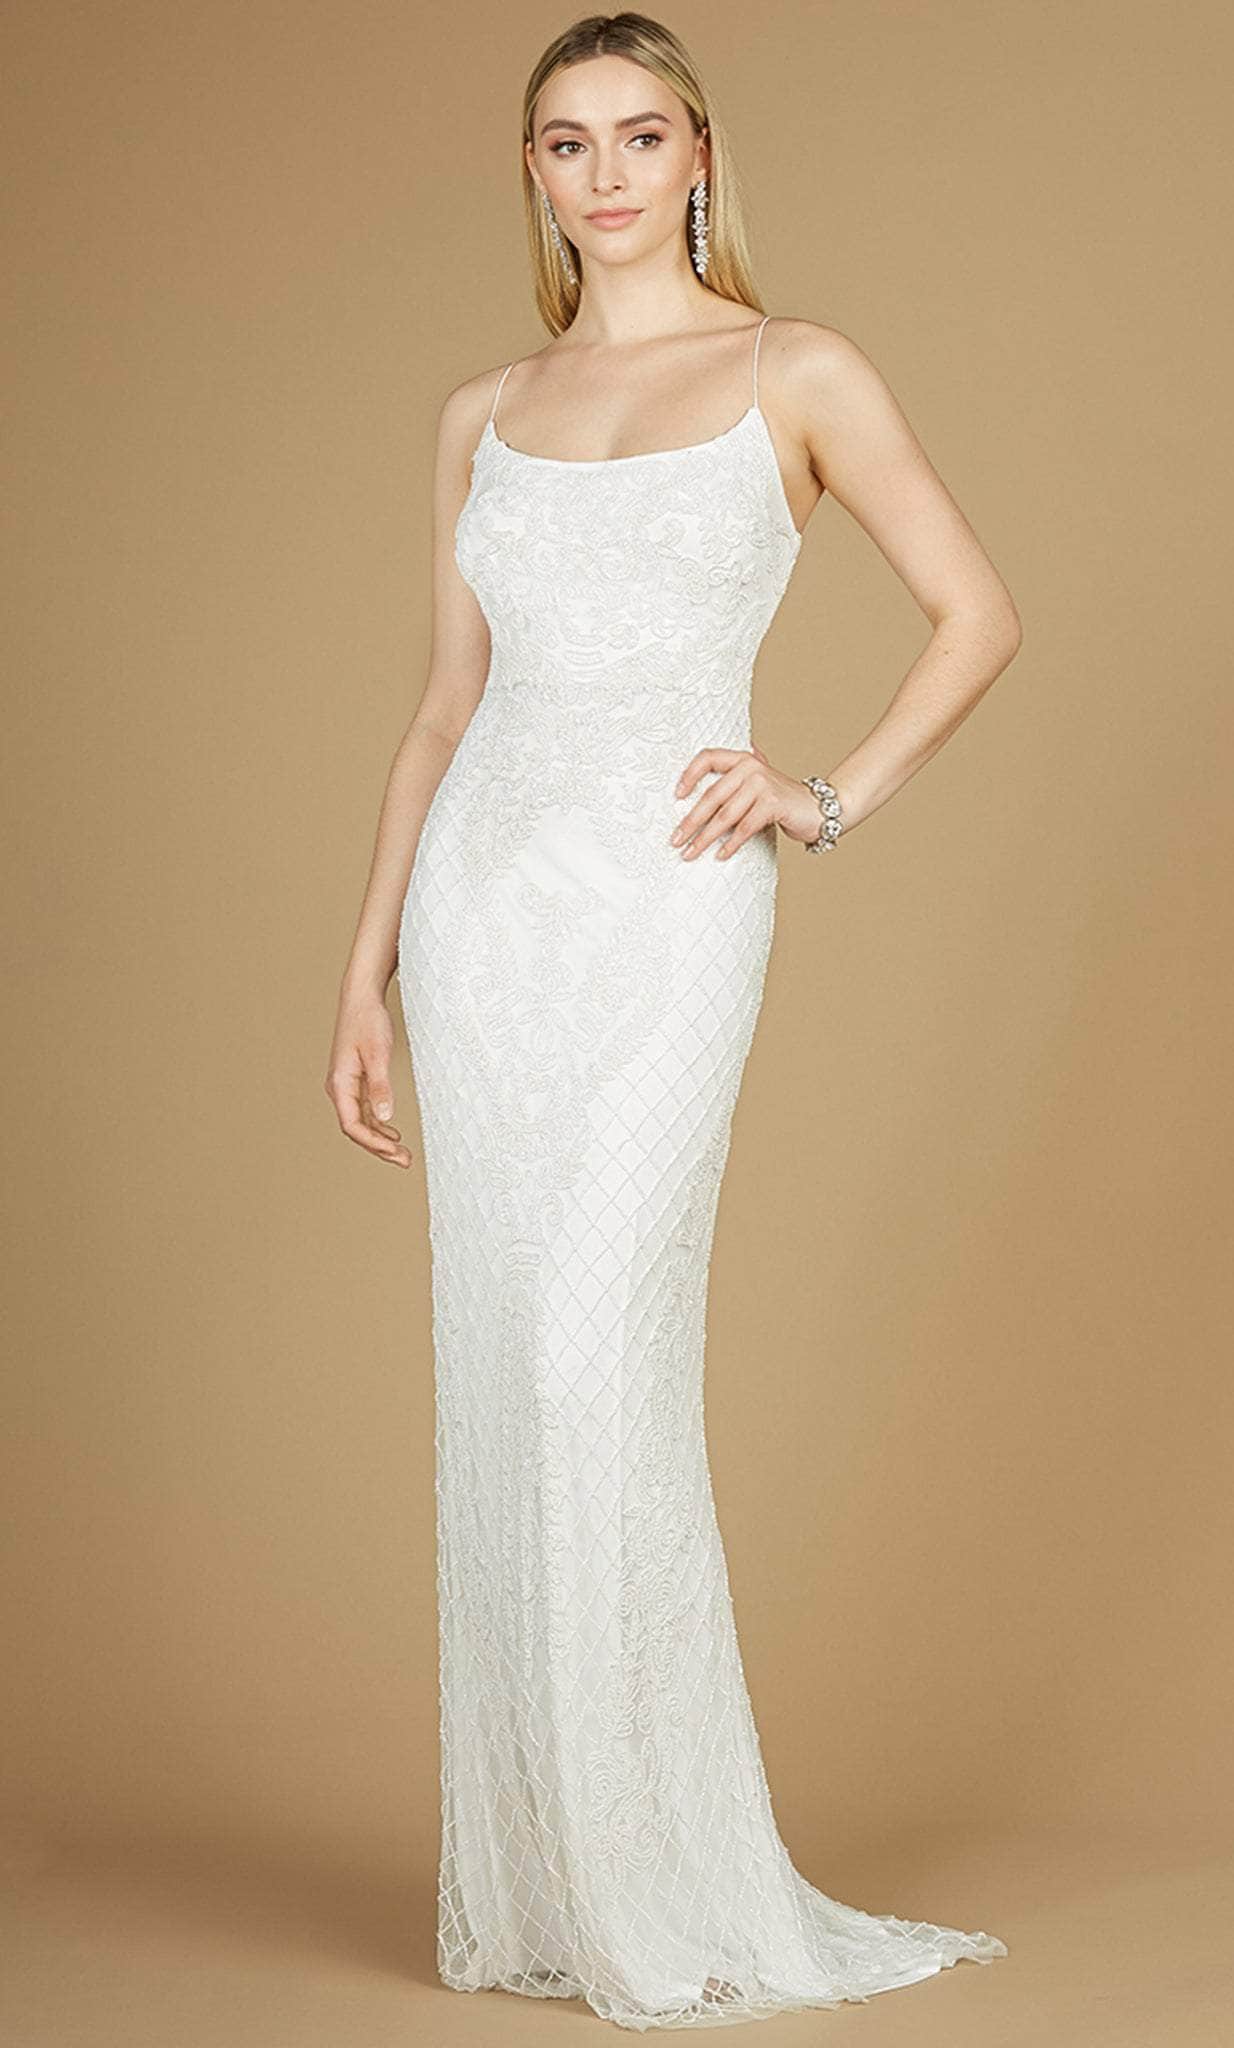 Lara Dresses 51113 - Lace Embroidered Scoop Bridal Gown Bridal Dresses 0 / Ivory